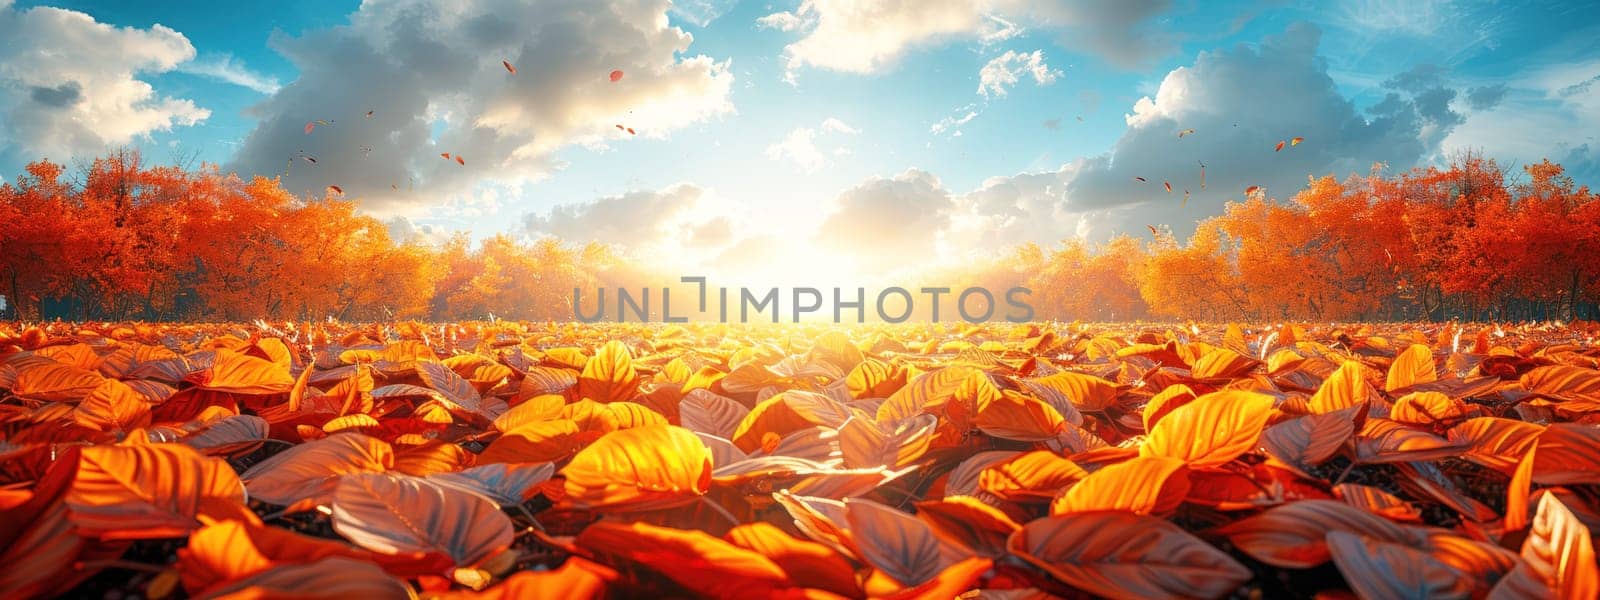 Autumn mood and falling leaves by Ciorba